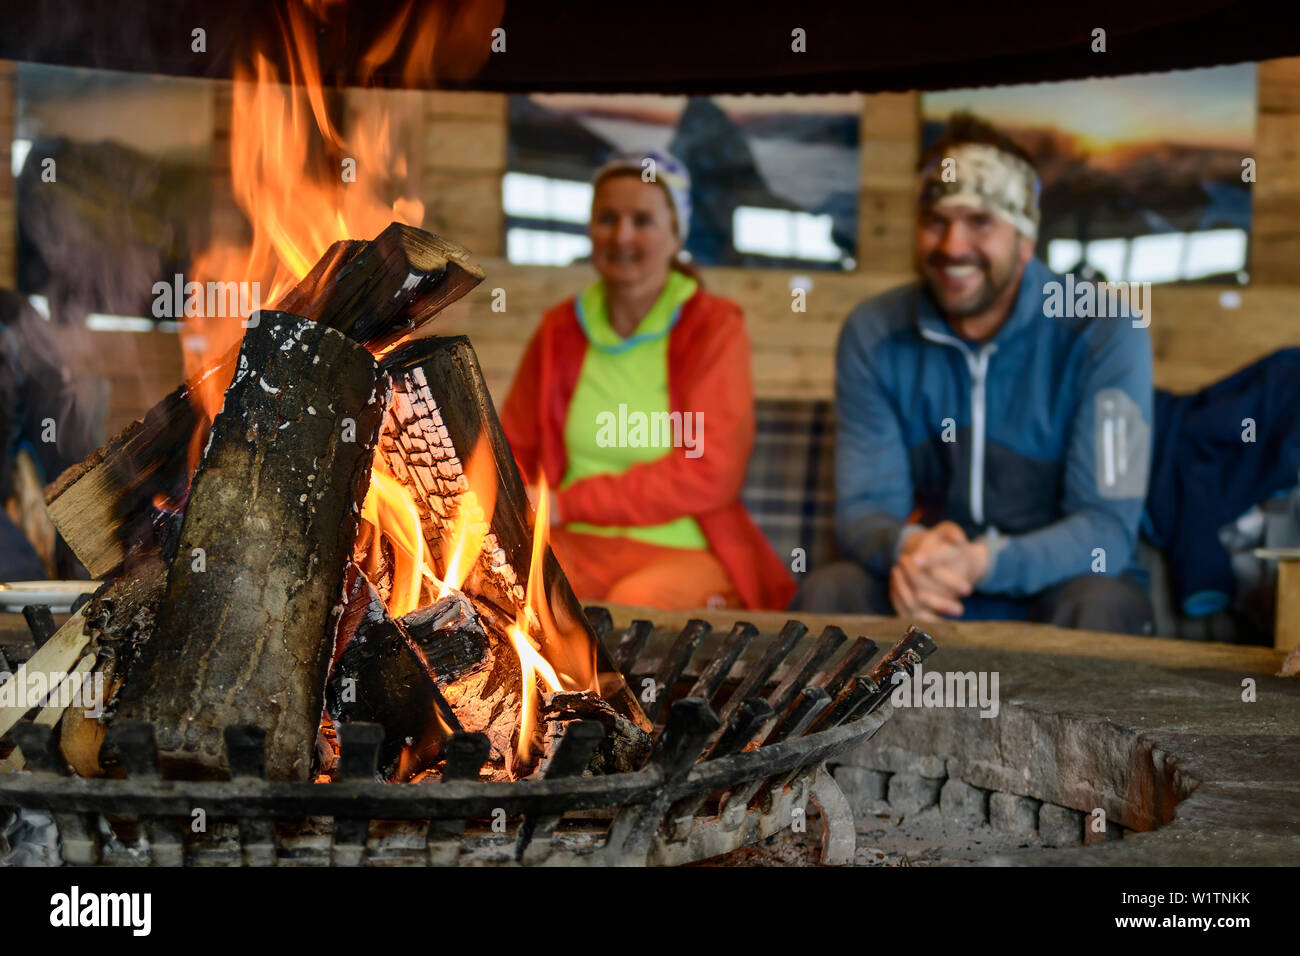 Burning logs in open fire, man and woman out of focus in background, ski arena Kaltenbach, valley of Zillertal, Tuxer Alps, Tyrol, Austria Stock Photo